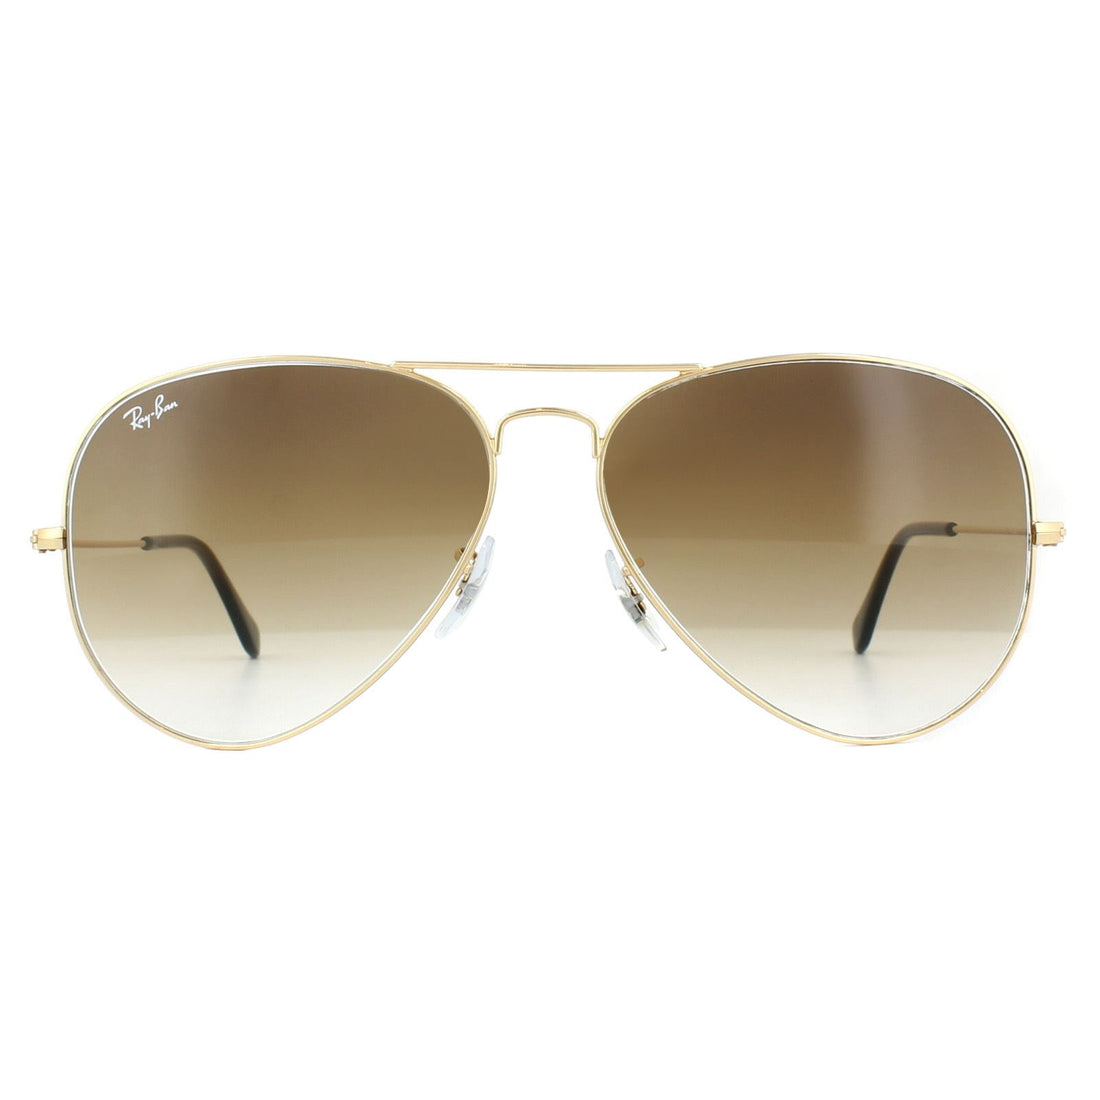 Ray-Ban Aviator Gradient RB3025 Sunglasses Gold / Brown Gradient 62